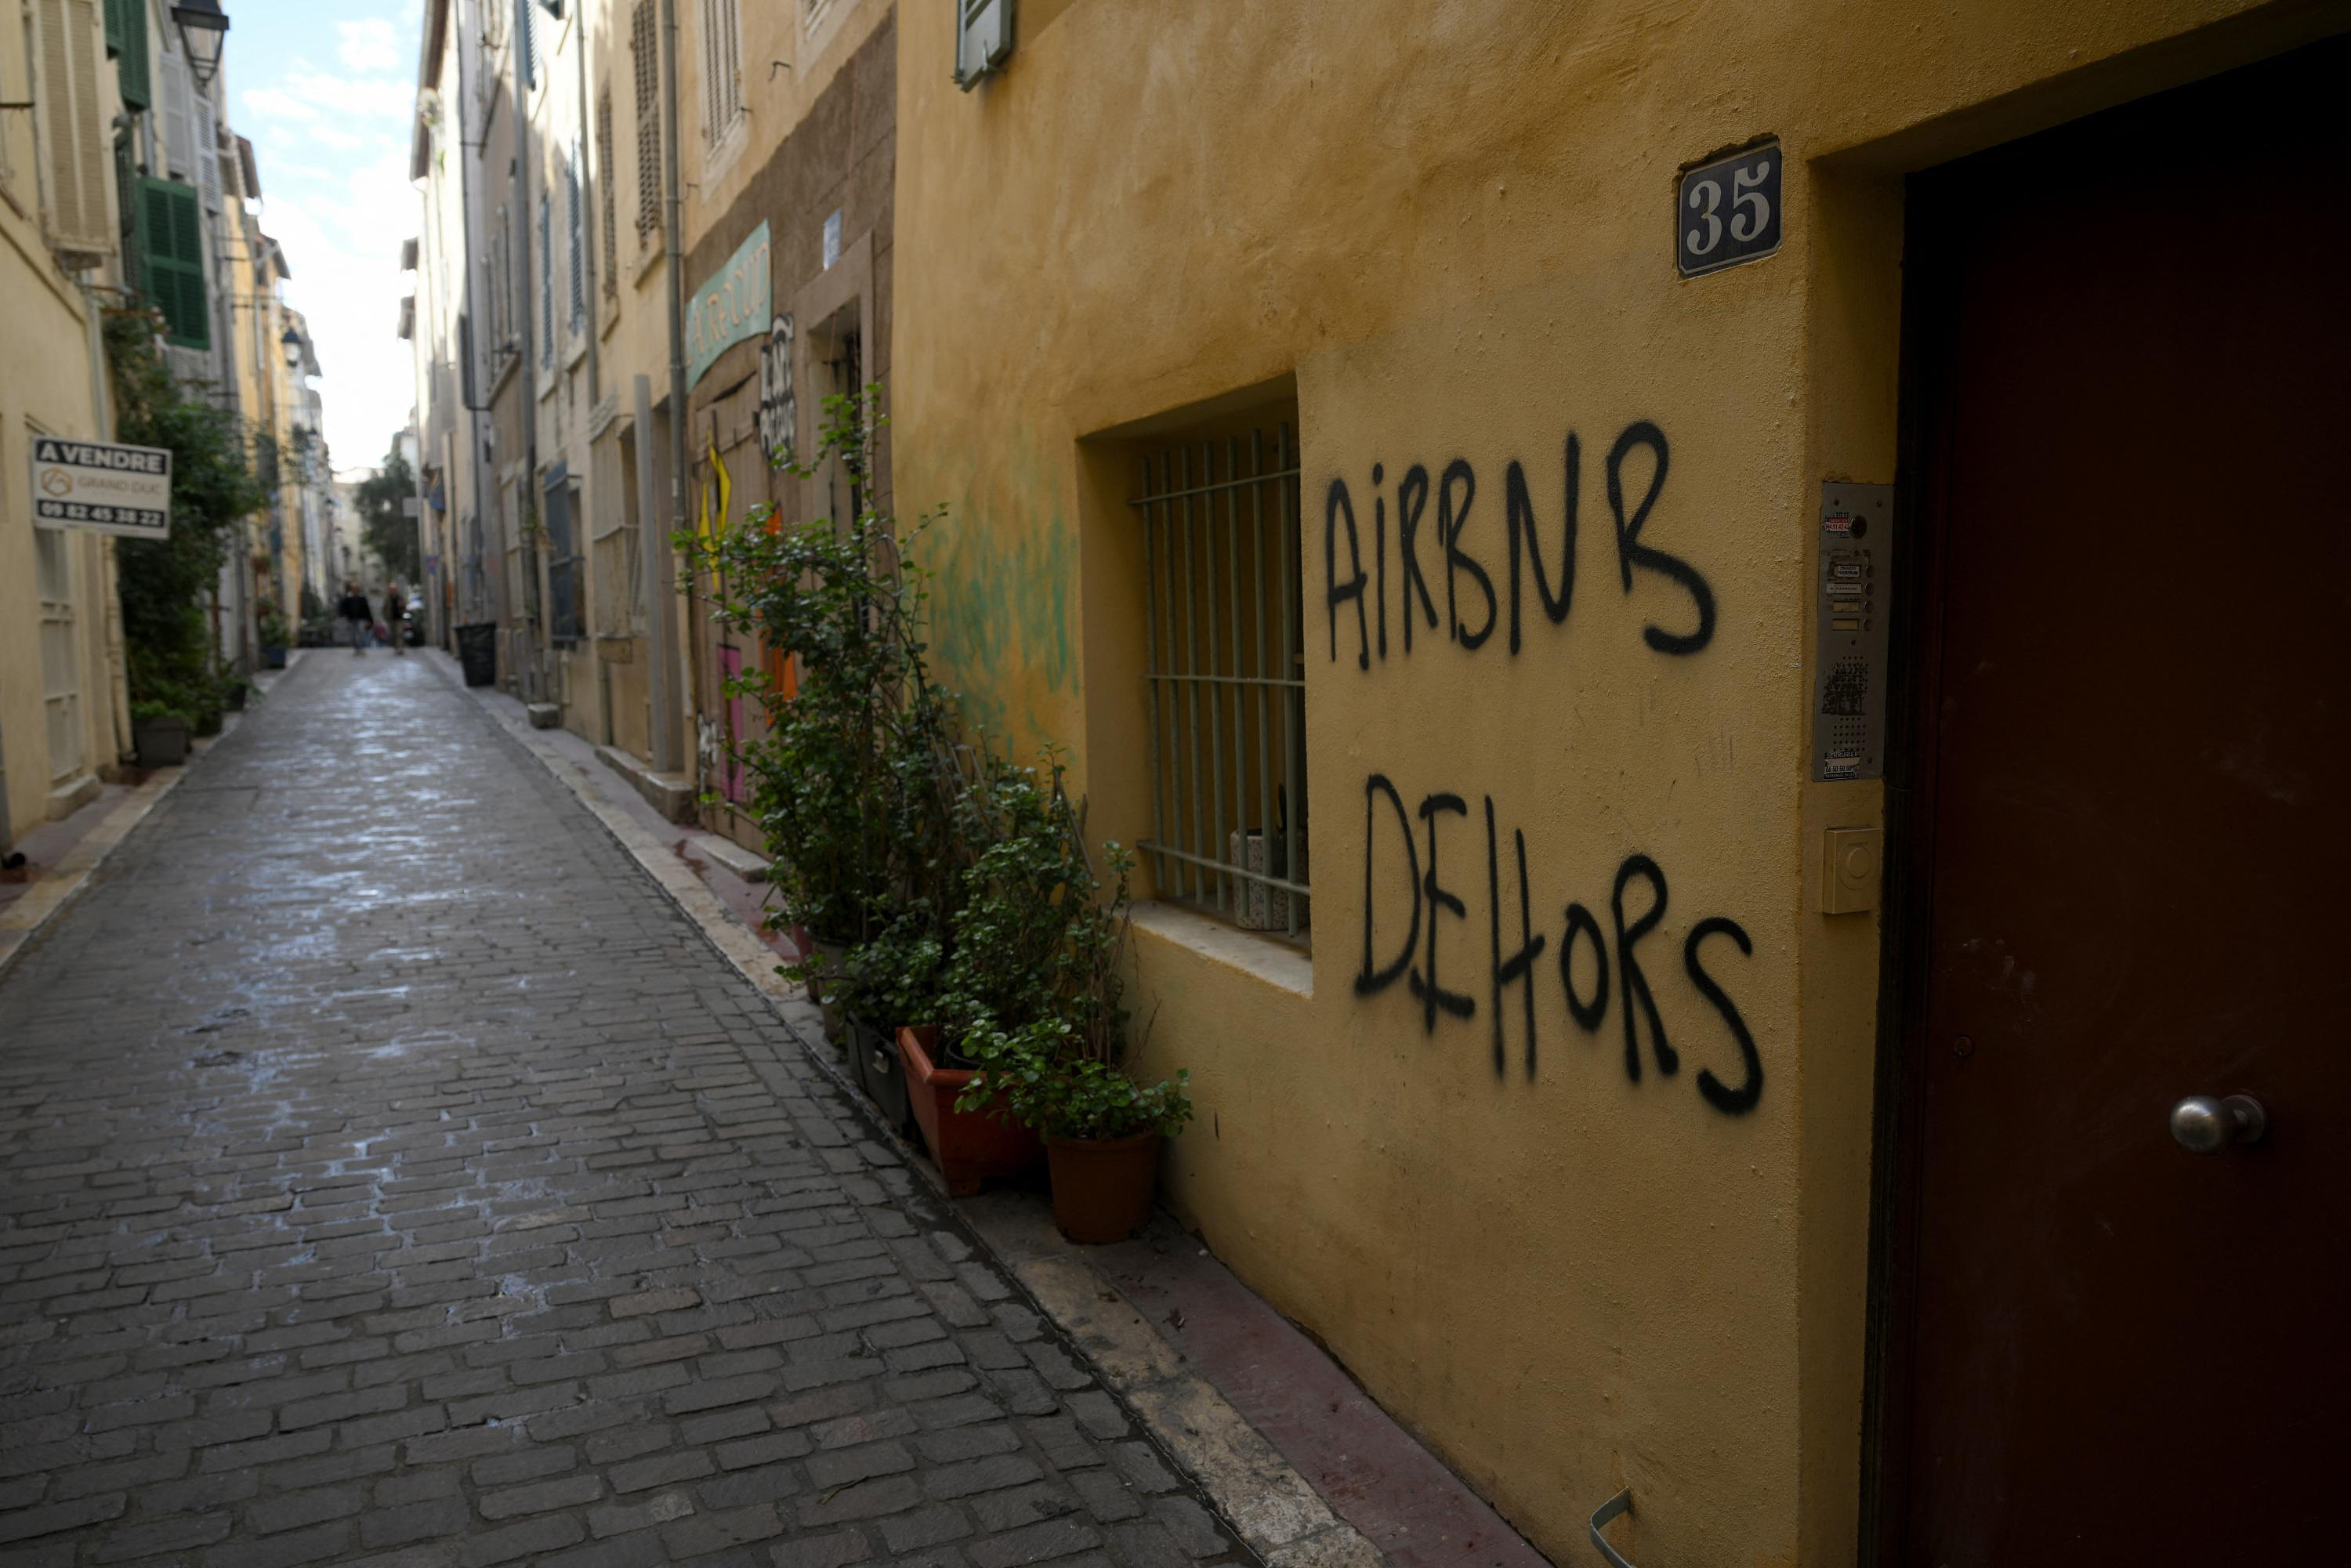 Vandalism, theft, hunt for rental companies… Protest against Airbnb on the rise in Marseille